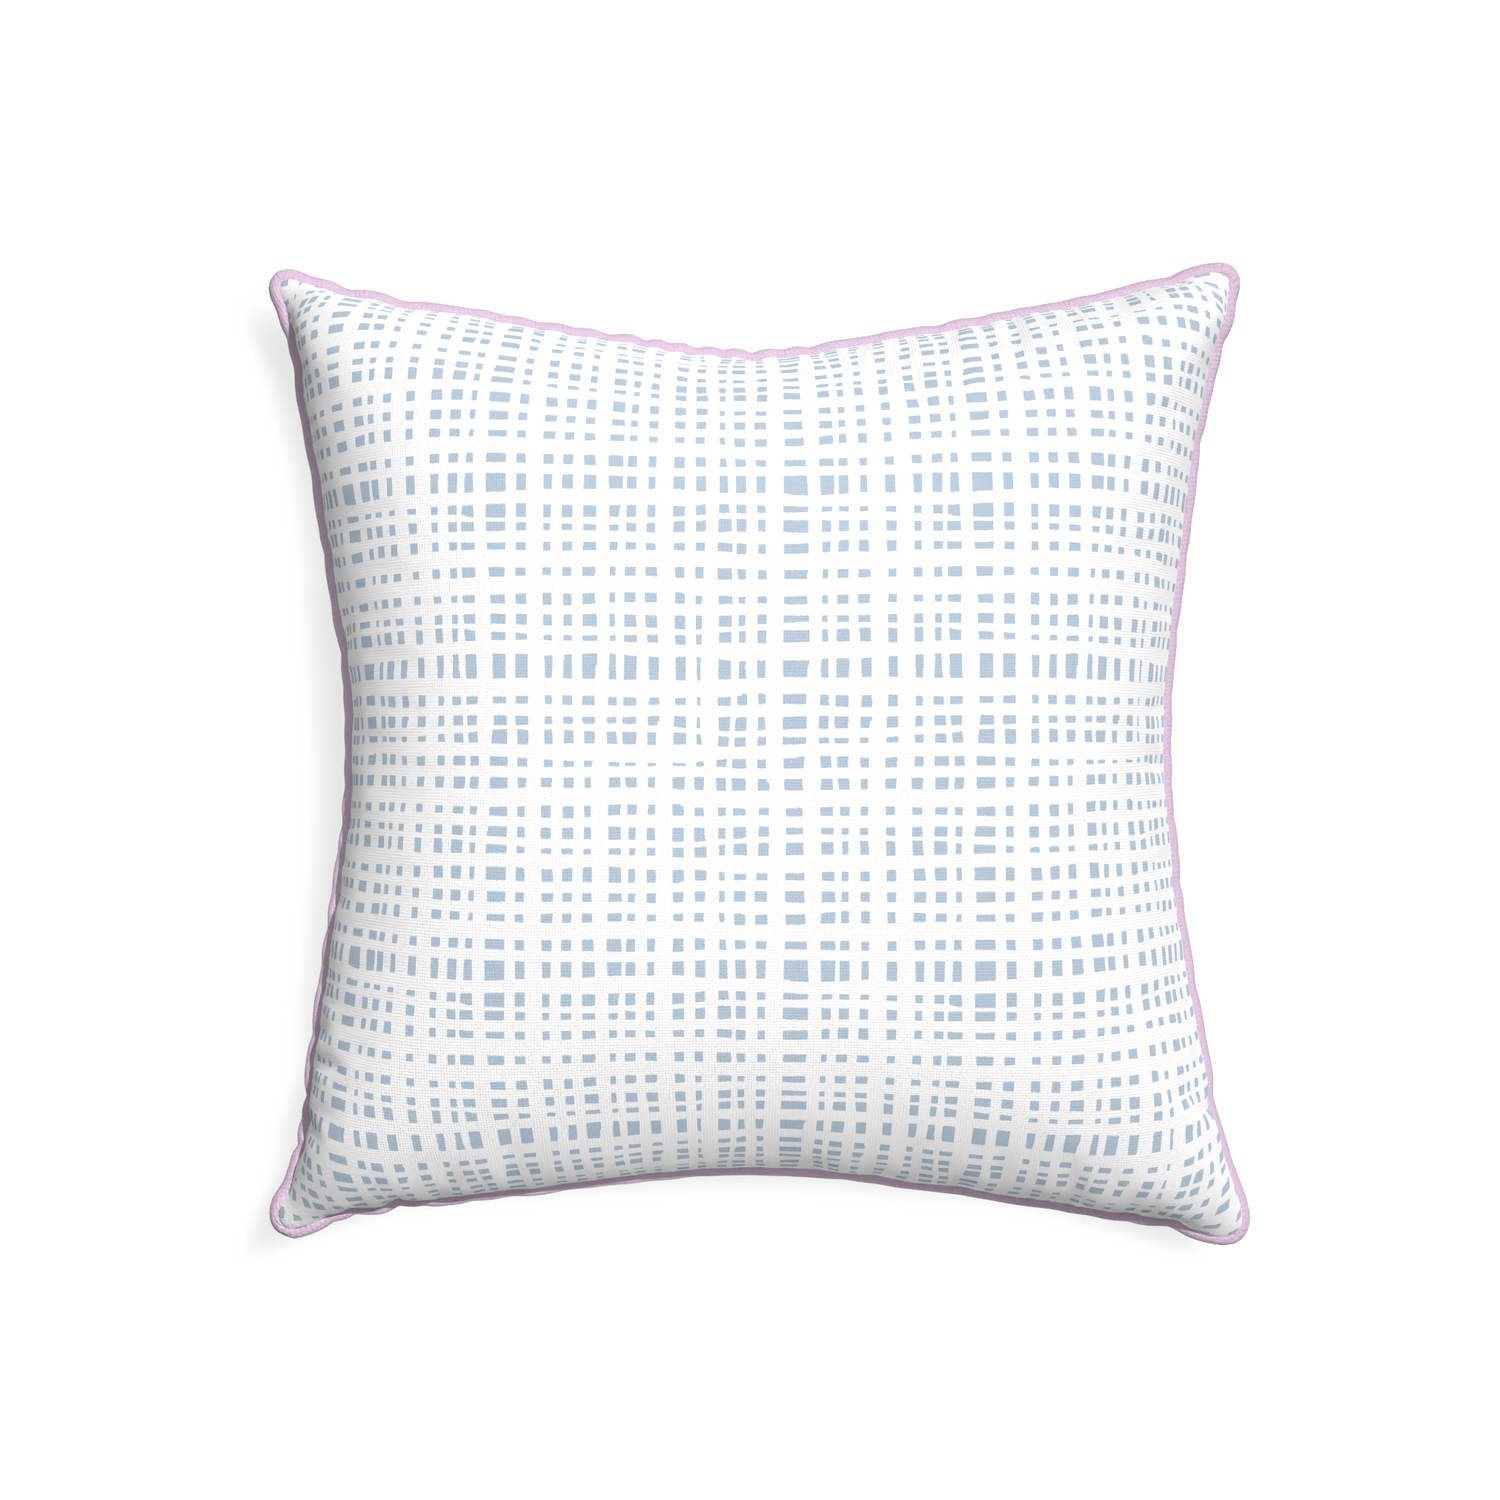 22-square ginger sky custom pillow with l piping on white background